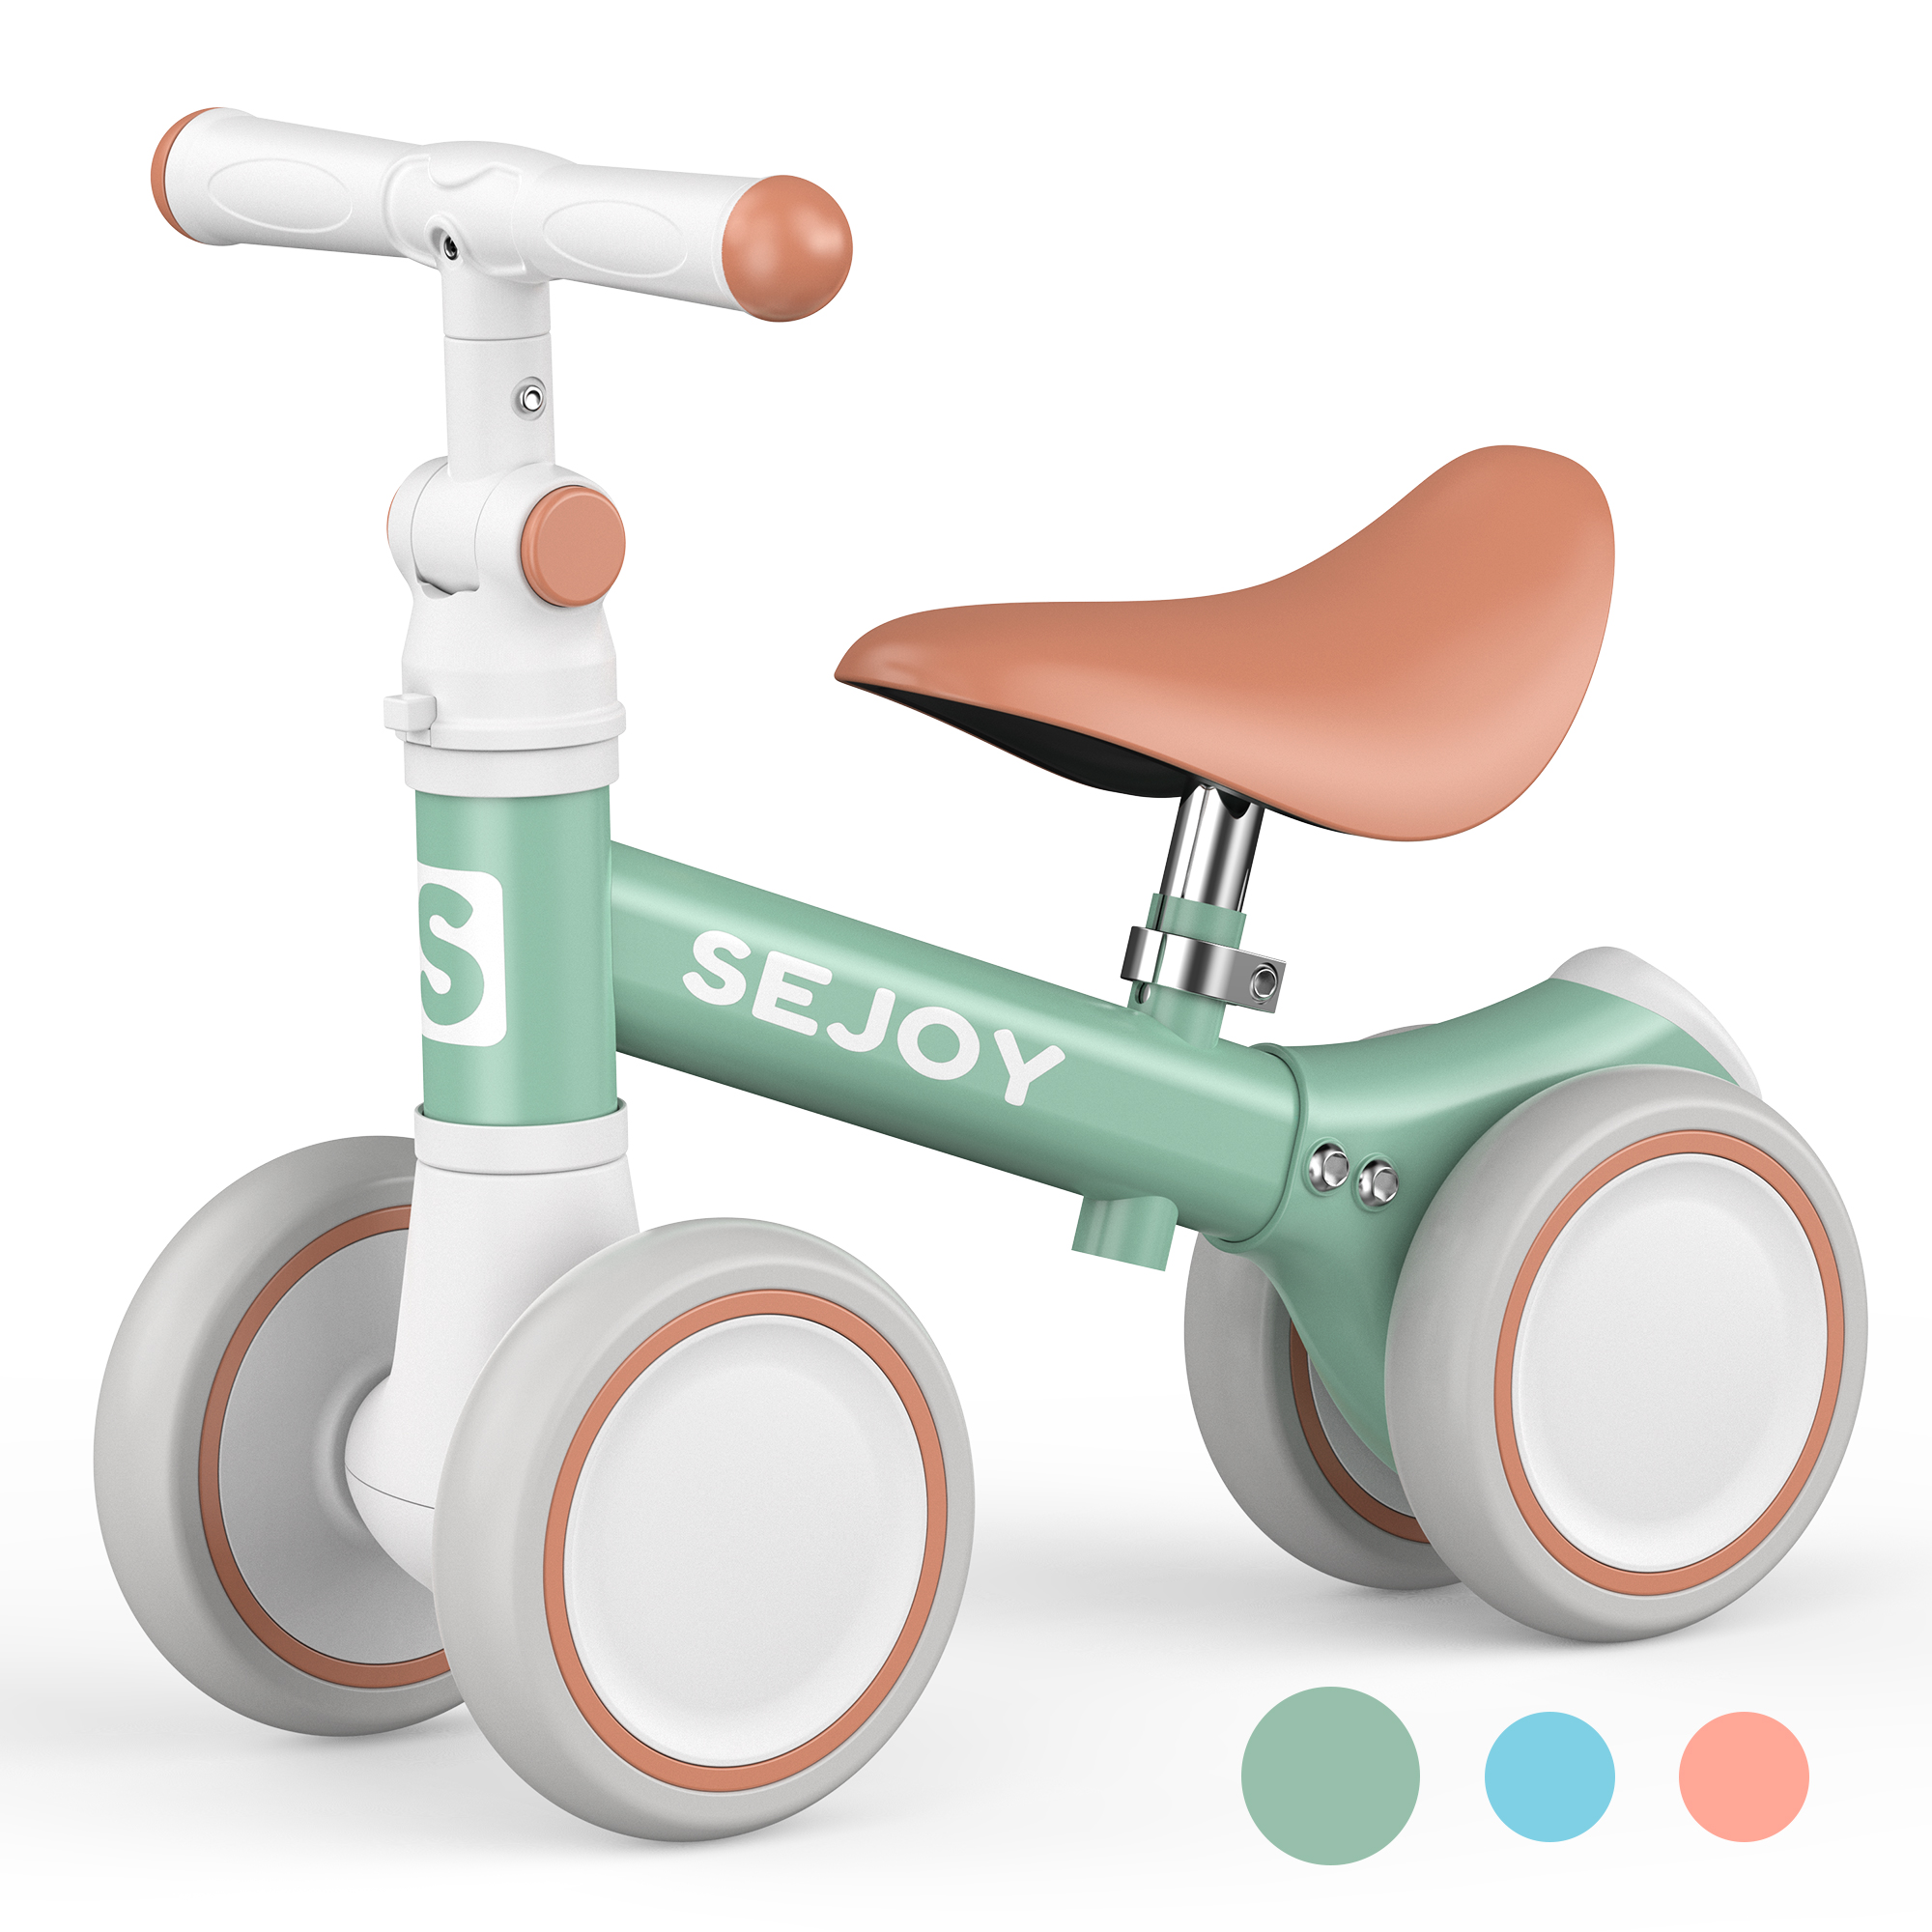 Sejoy Baby Balance Bike, Toddler Baby Bicycle with 4 Wheels for 10-36 Months, Adjustable Handlebar Baby Outdoor Bike Riding Toy, First B-day Gift - image 5 of 9